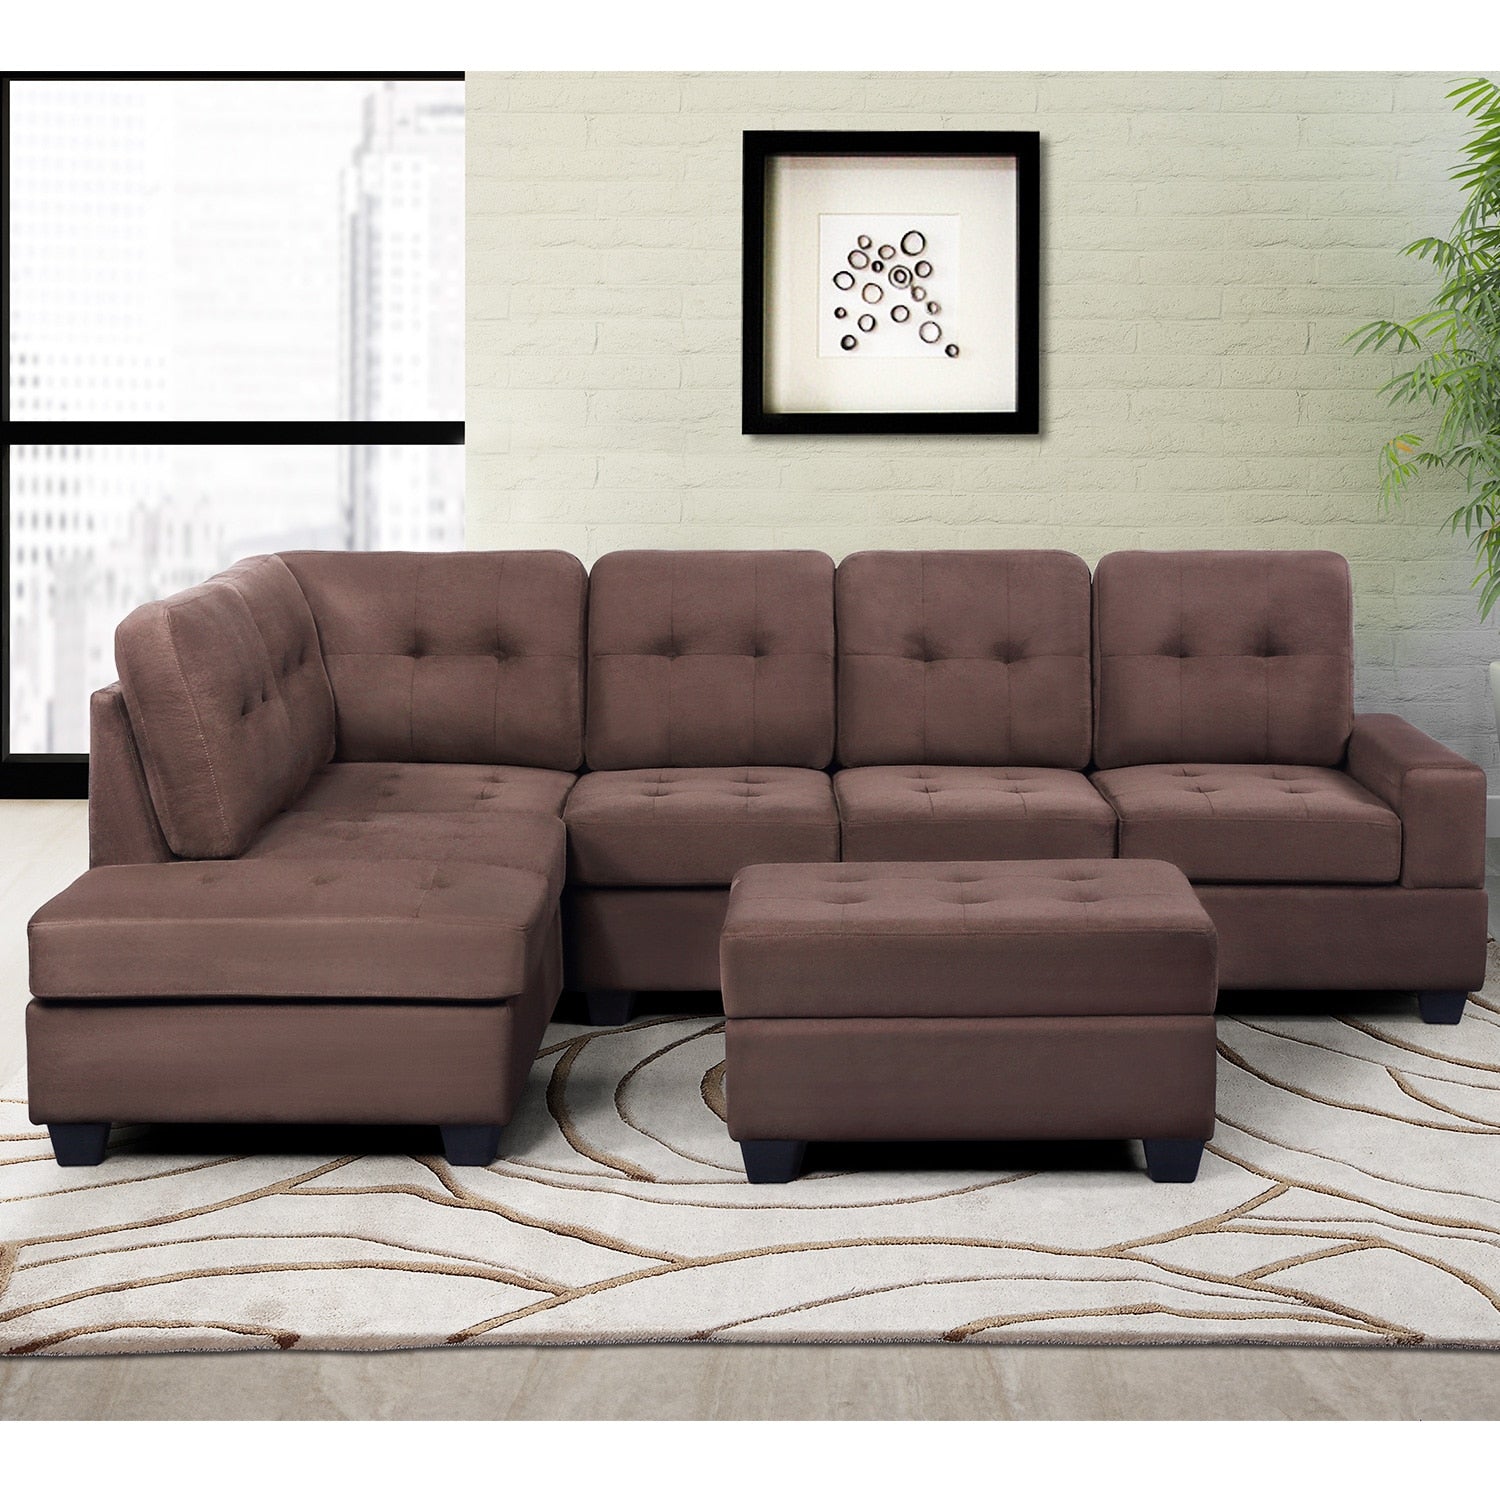 3 Piece Sectional Sofa Microfiber with Reversible Chaise Lounge Storage Ottoman and Cup Holders Antique Gray/Brown[US-W]